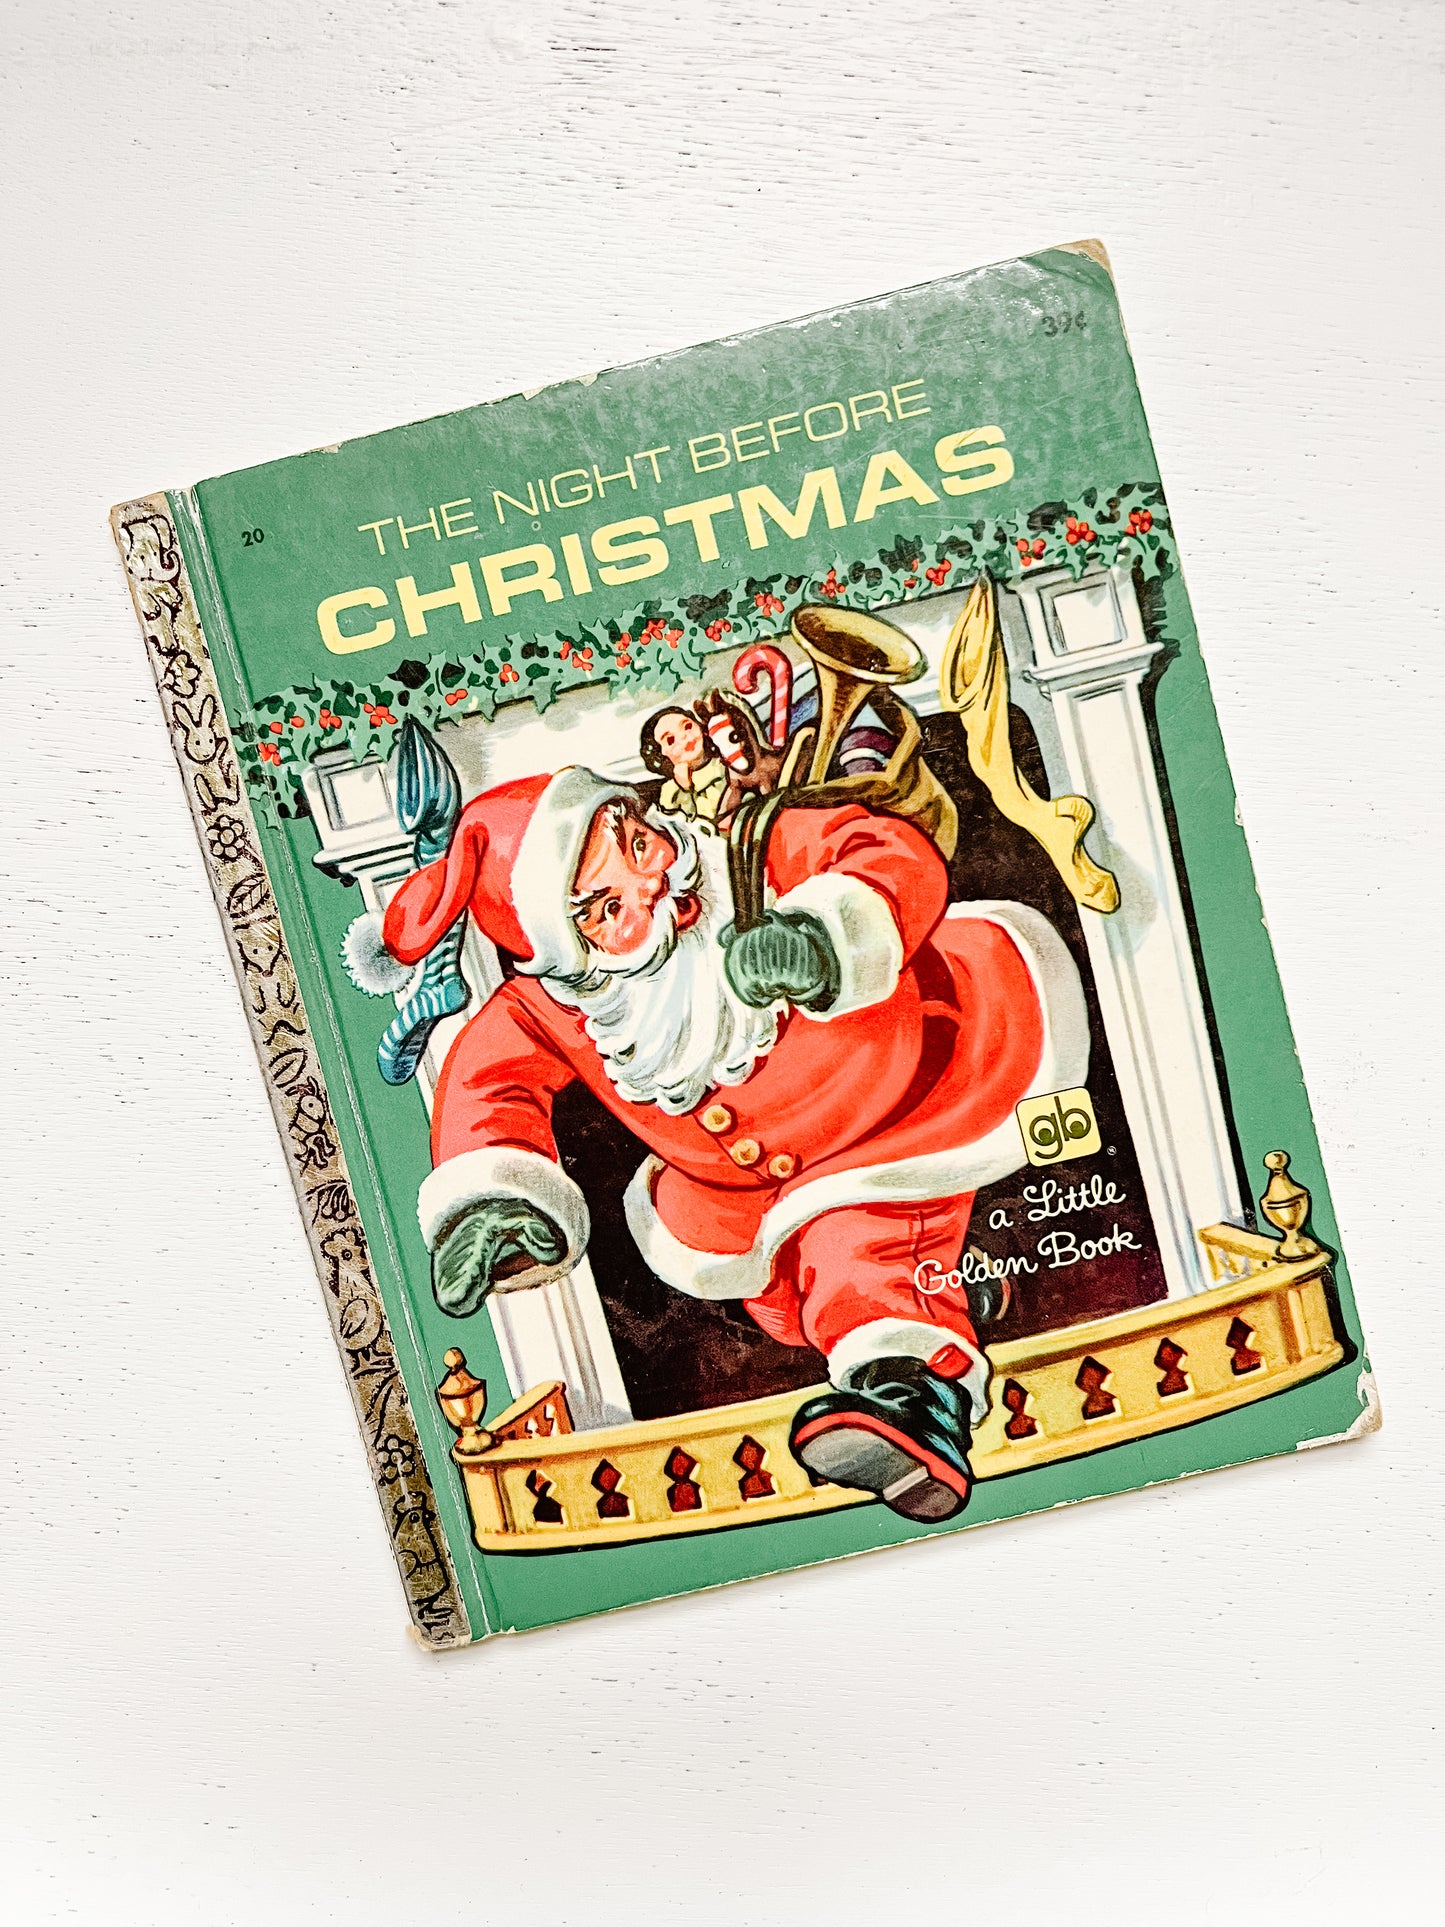 Little Golden Book “The Night Before Christmas”